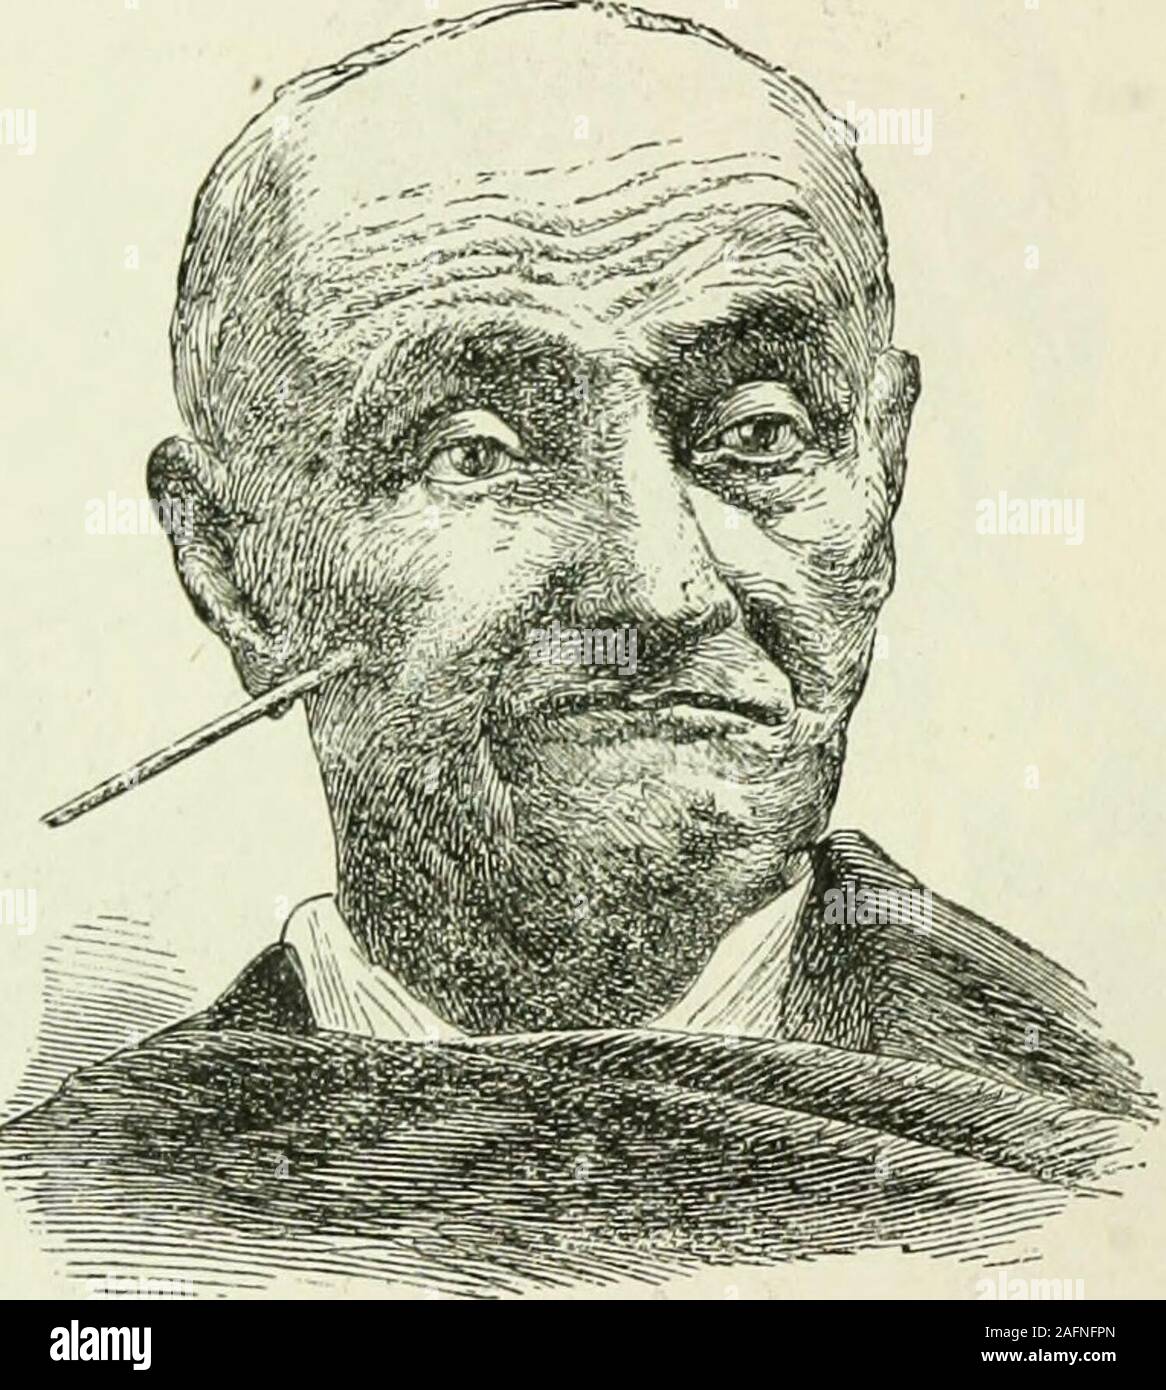 . Practical electricity in medicine and surgery. Fig. 142.—Bilateral Contraction of the Zygomatics Major. The Contractionof the Orbicularis Palpebrarum is also Shown in the Cut. The expression varies according to the intensity of the contrac-tion from attention to astonishment, surprise, and terror. The corrugator supercilii is easily isolated at the outer angleof the brow. (See Figs. 138 and 141.) Effects: Flatteningand depression of the eyebrows, so that the latter overhang theupper lid. The inner ends of the brows are at the same time 166 PRACTICAL ELECTRICITY IN MEDICINE AND SURGERY. drawn Stock Photo